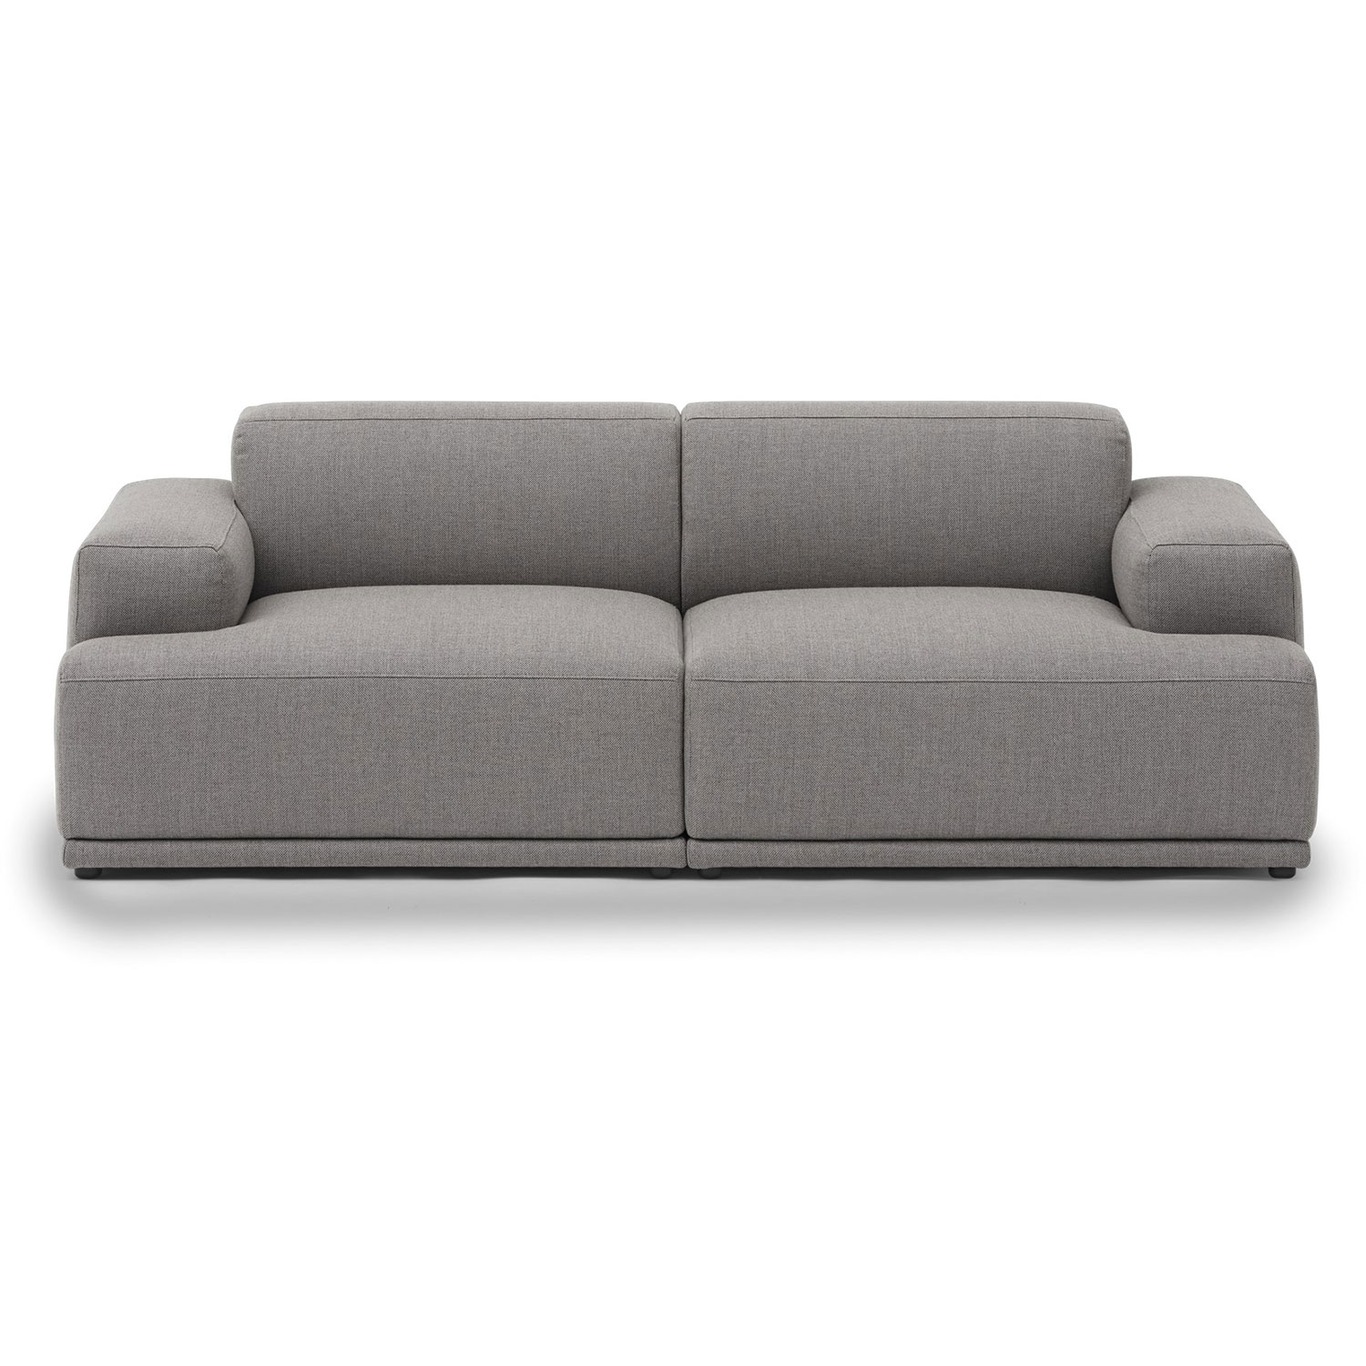 Connect Soft Sofa 2-seters Config 1, Re-Wool 128